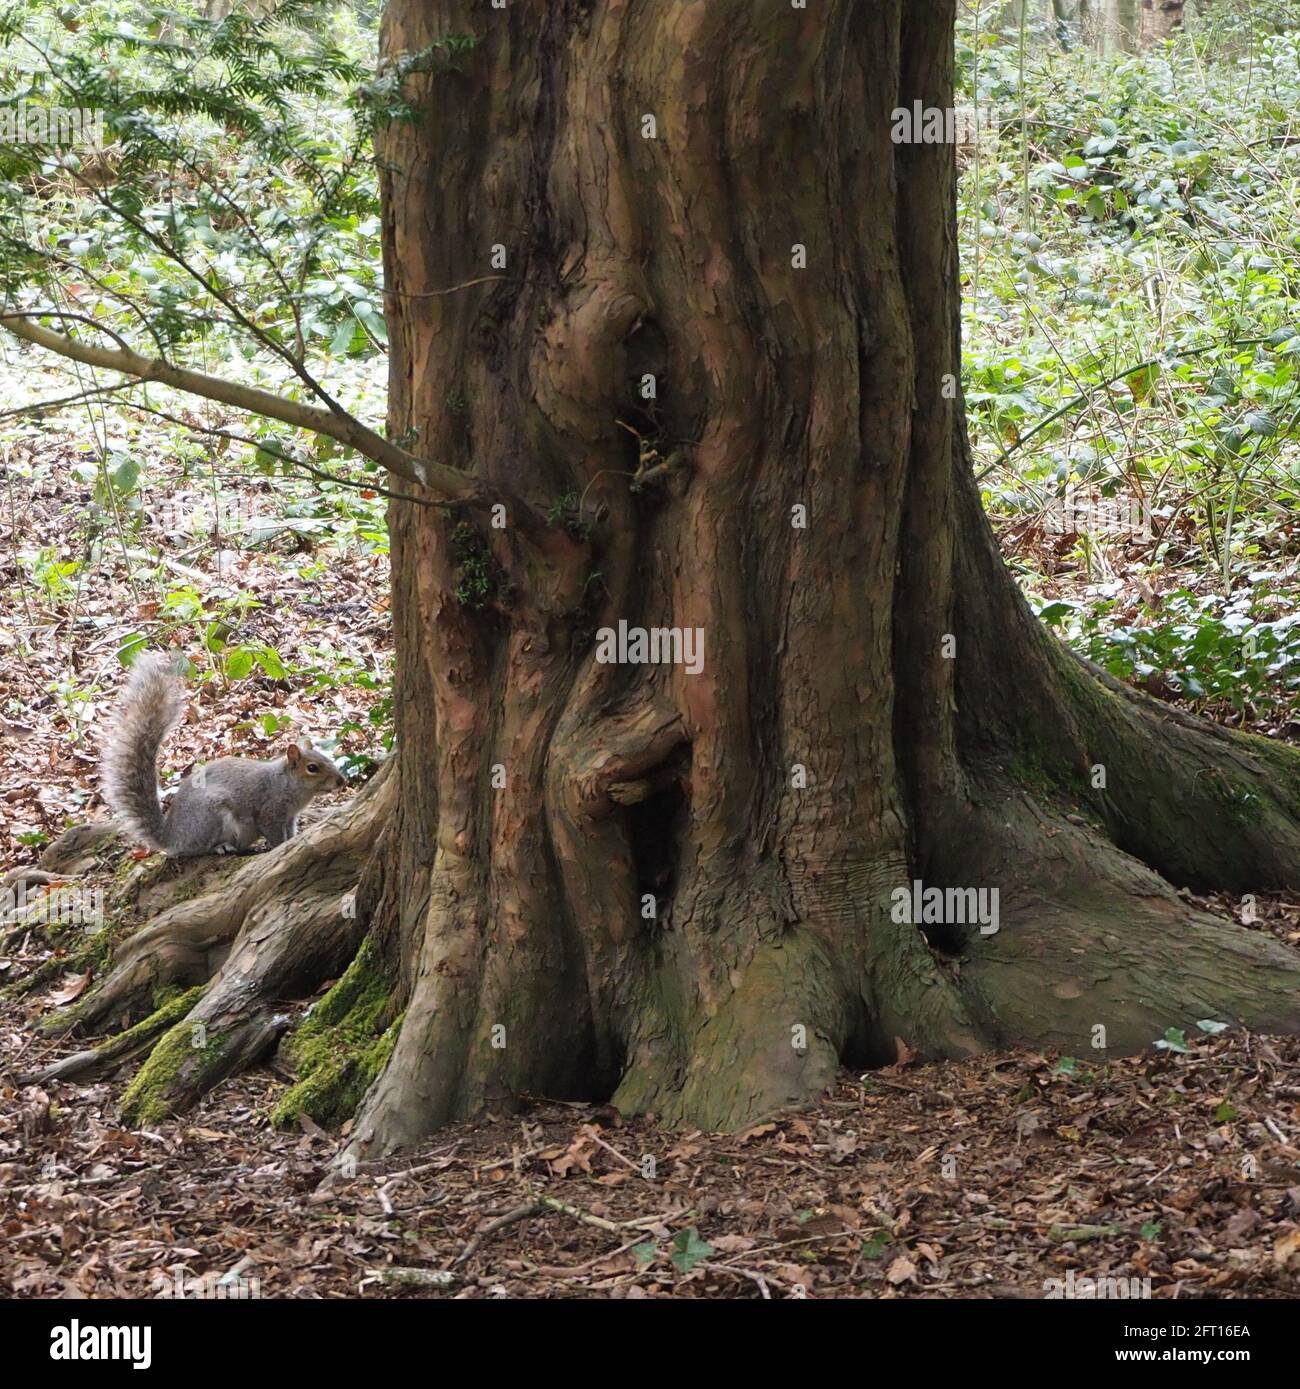 Redwood Tree trunk with Squirrel Stock Photo